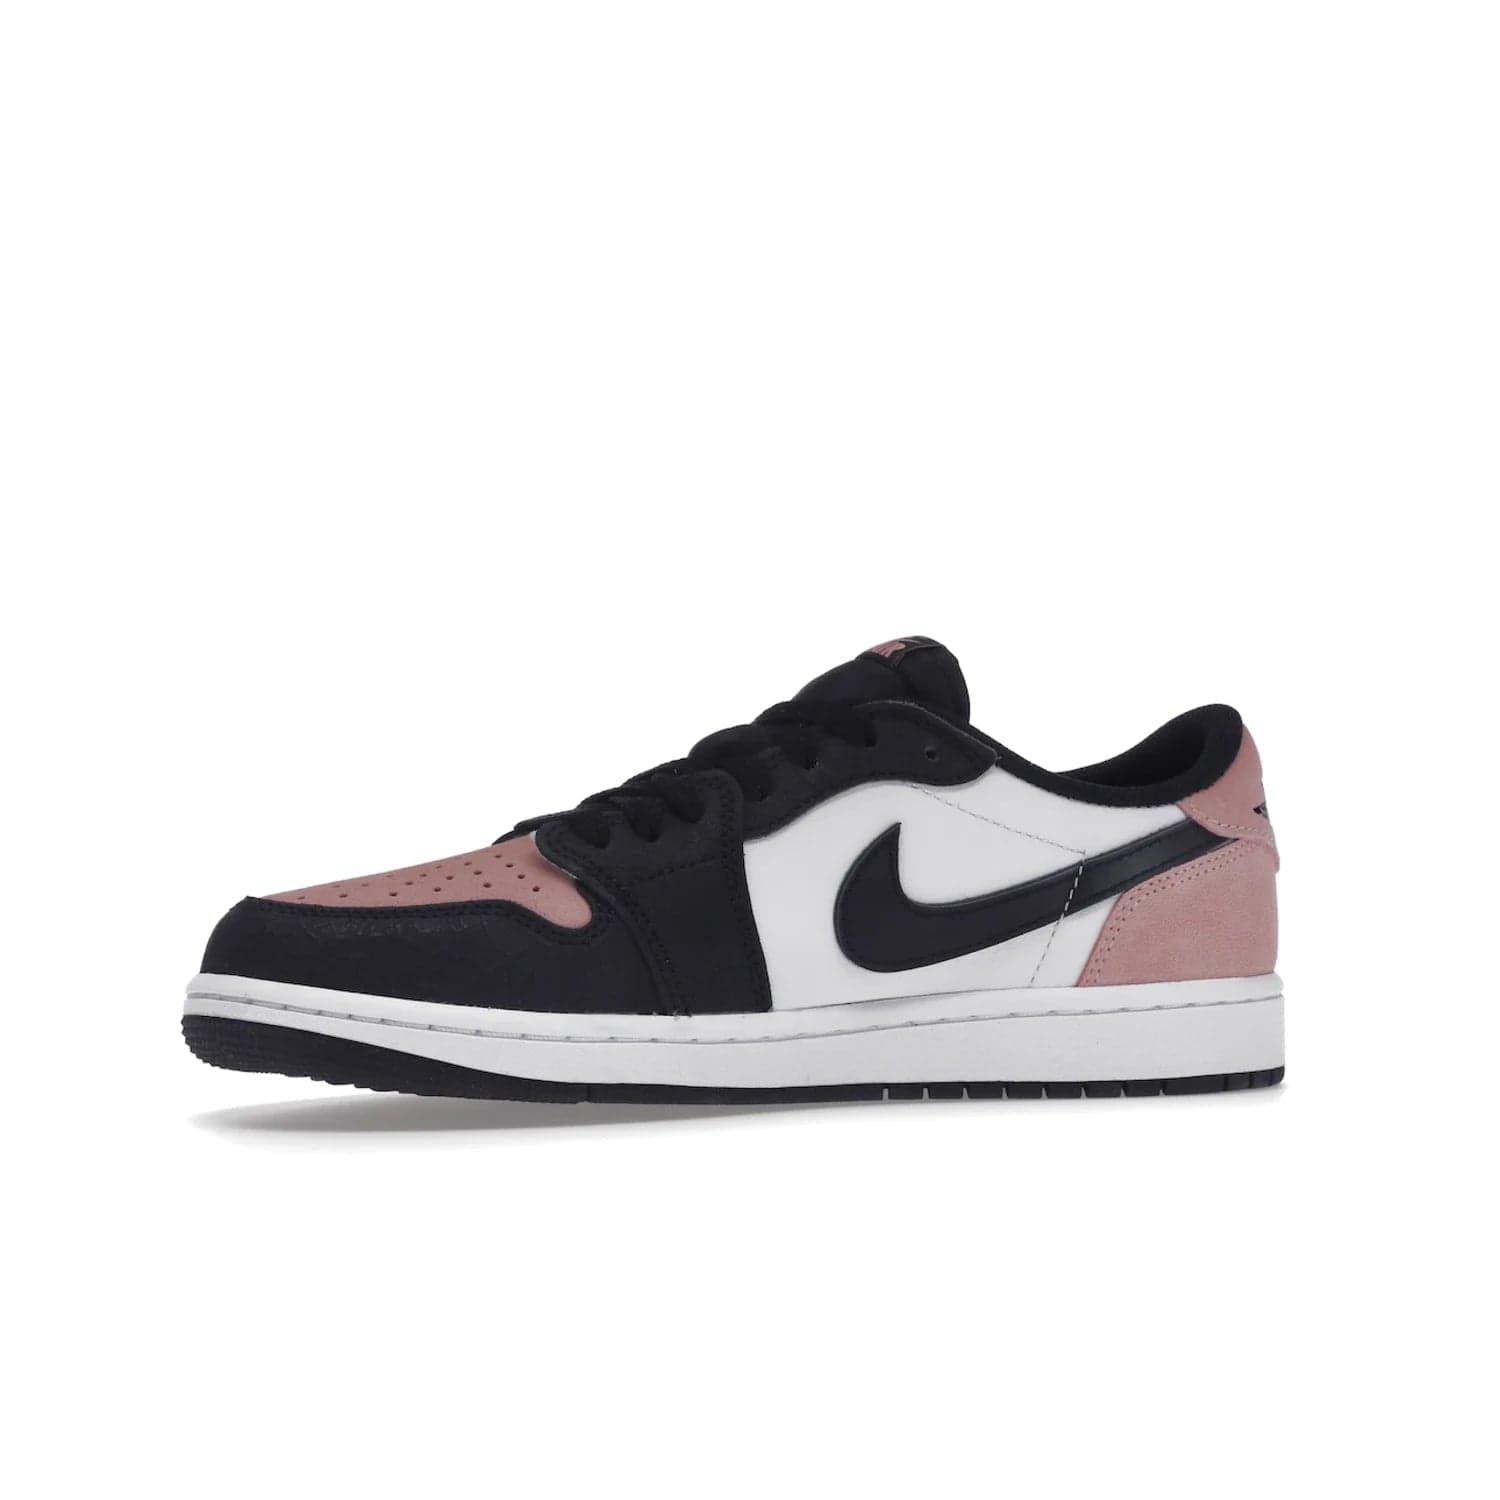 Jordan 1 Low OG Bleached Coral - Image 17 - Only at www.BallersClubKickz.com - Introducing the Air Jordan 1 Low OG Bleached Coral. Constructed with white leather, black cracked leather & Bleached Coral suede. Signature Jordan Wings logo, white Air sole. Get the pack in July 2022 and stand out.